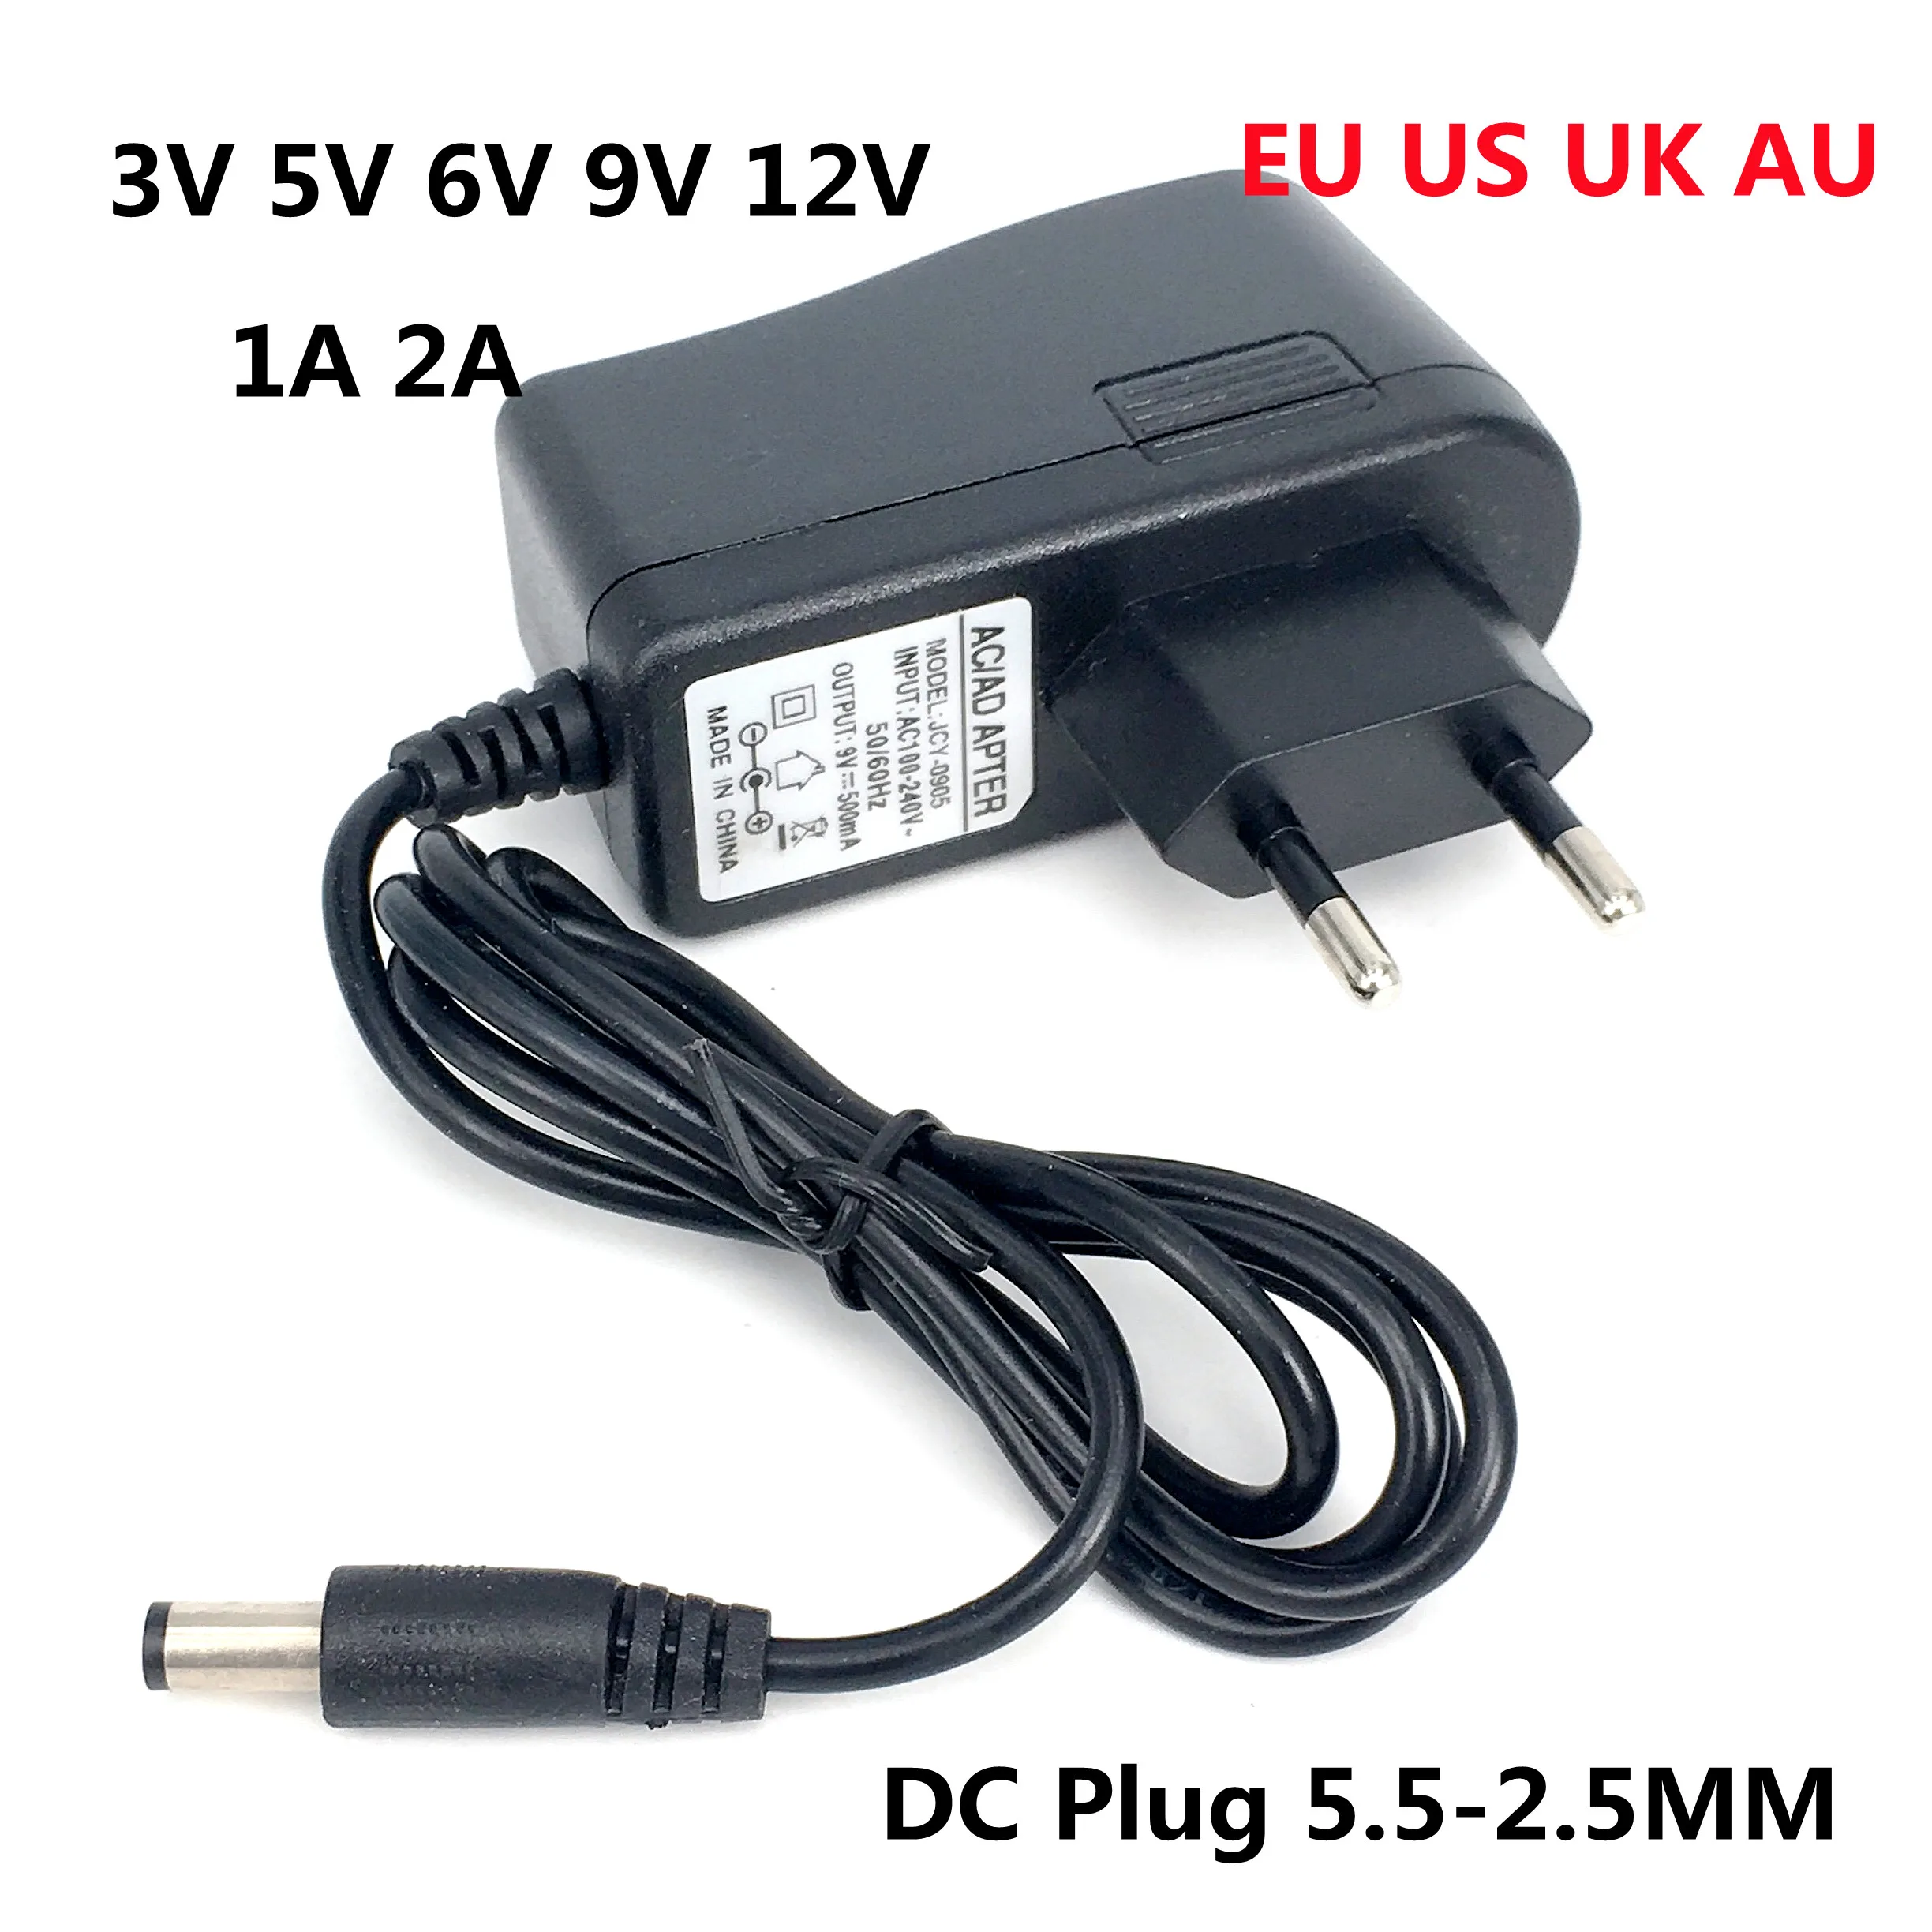 12V 5V 1A 2A 3A AC Power Supply Adapter charger For LED Strip light CCTV camera 